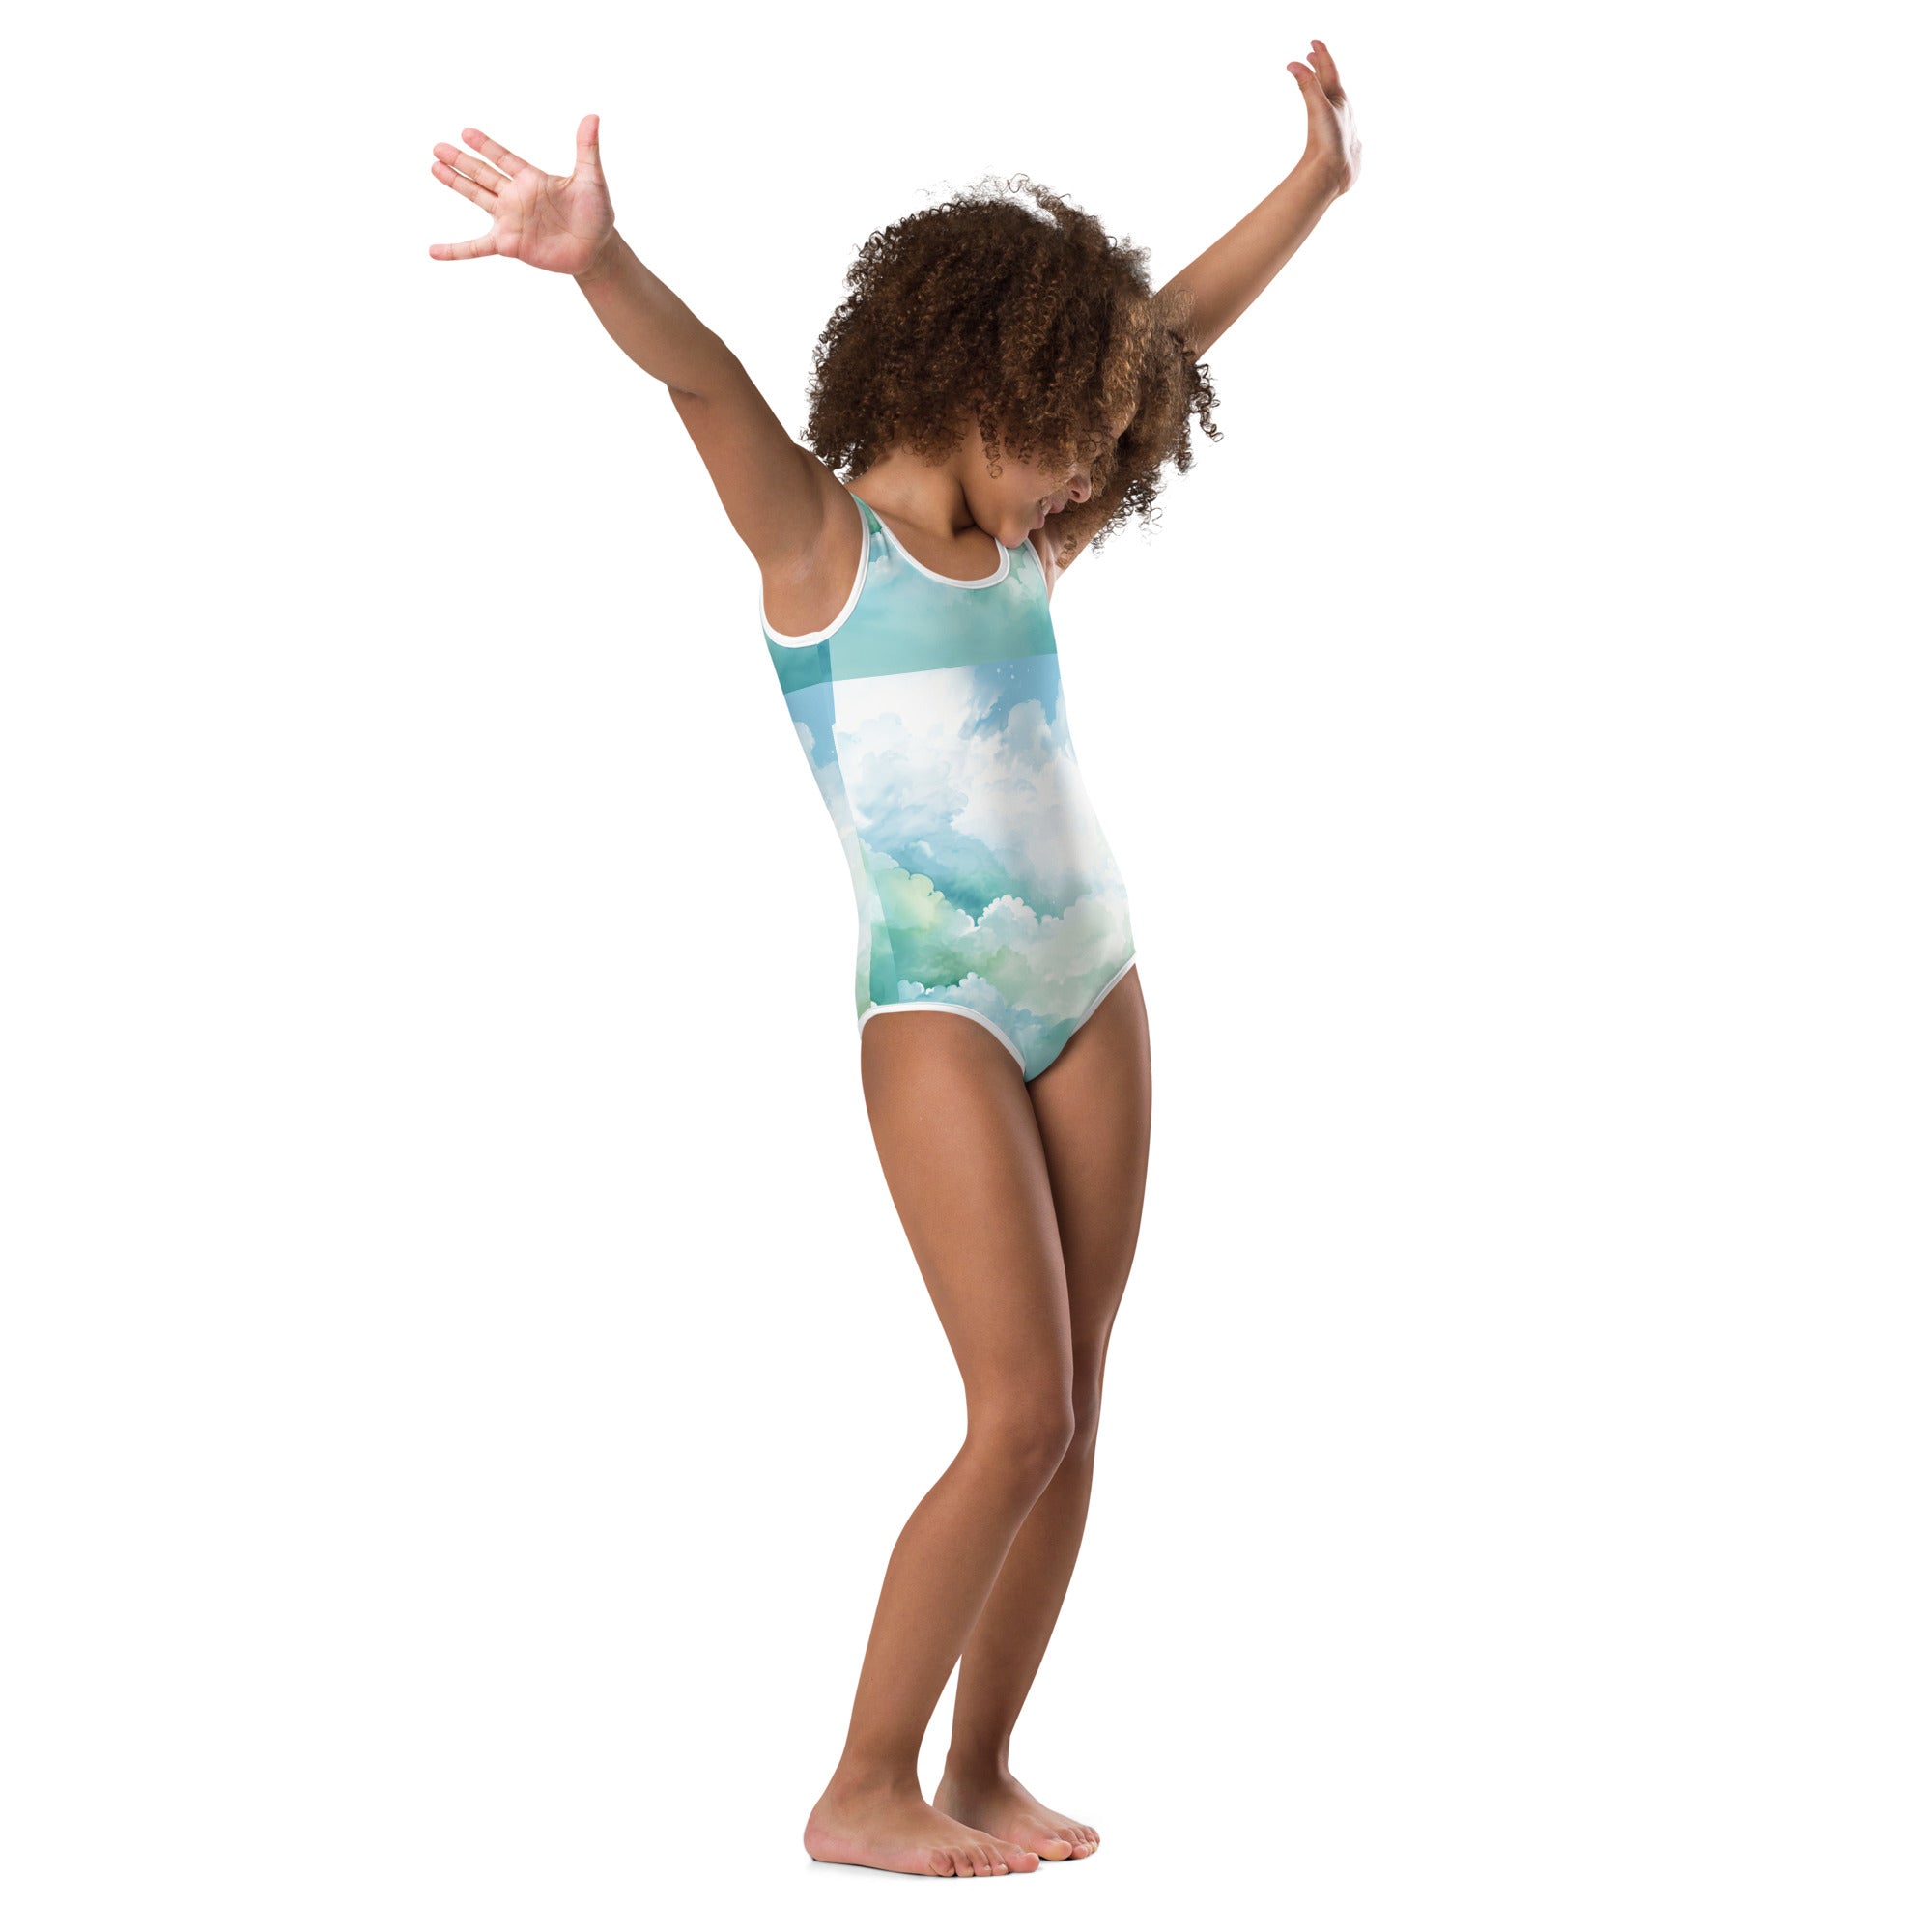 All-Over Print Kids Swimsuit- Kids And Todler's Bathing Suit